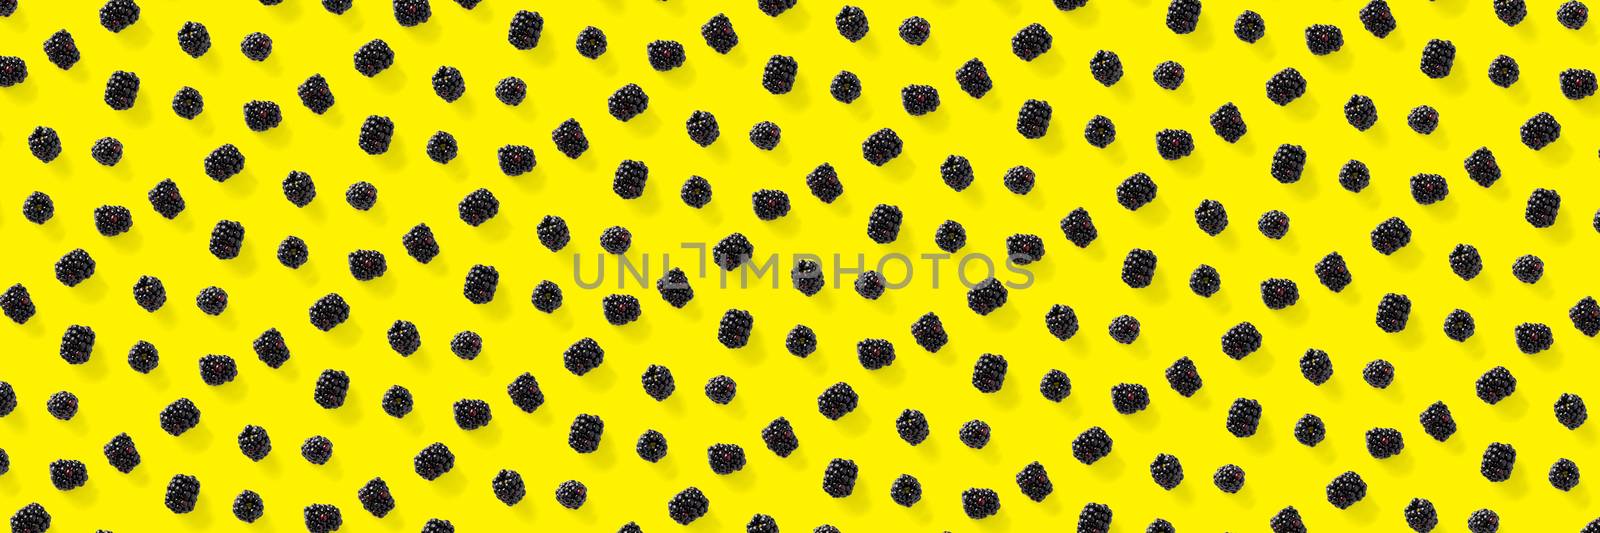 Background from isolated brambles. Group of tasty ripe blackberry isolated on yellow background. modern crative backround of falling blackberry or bramble.